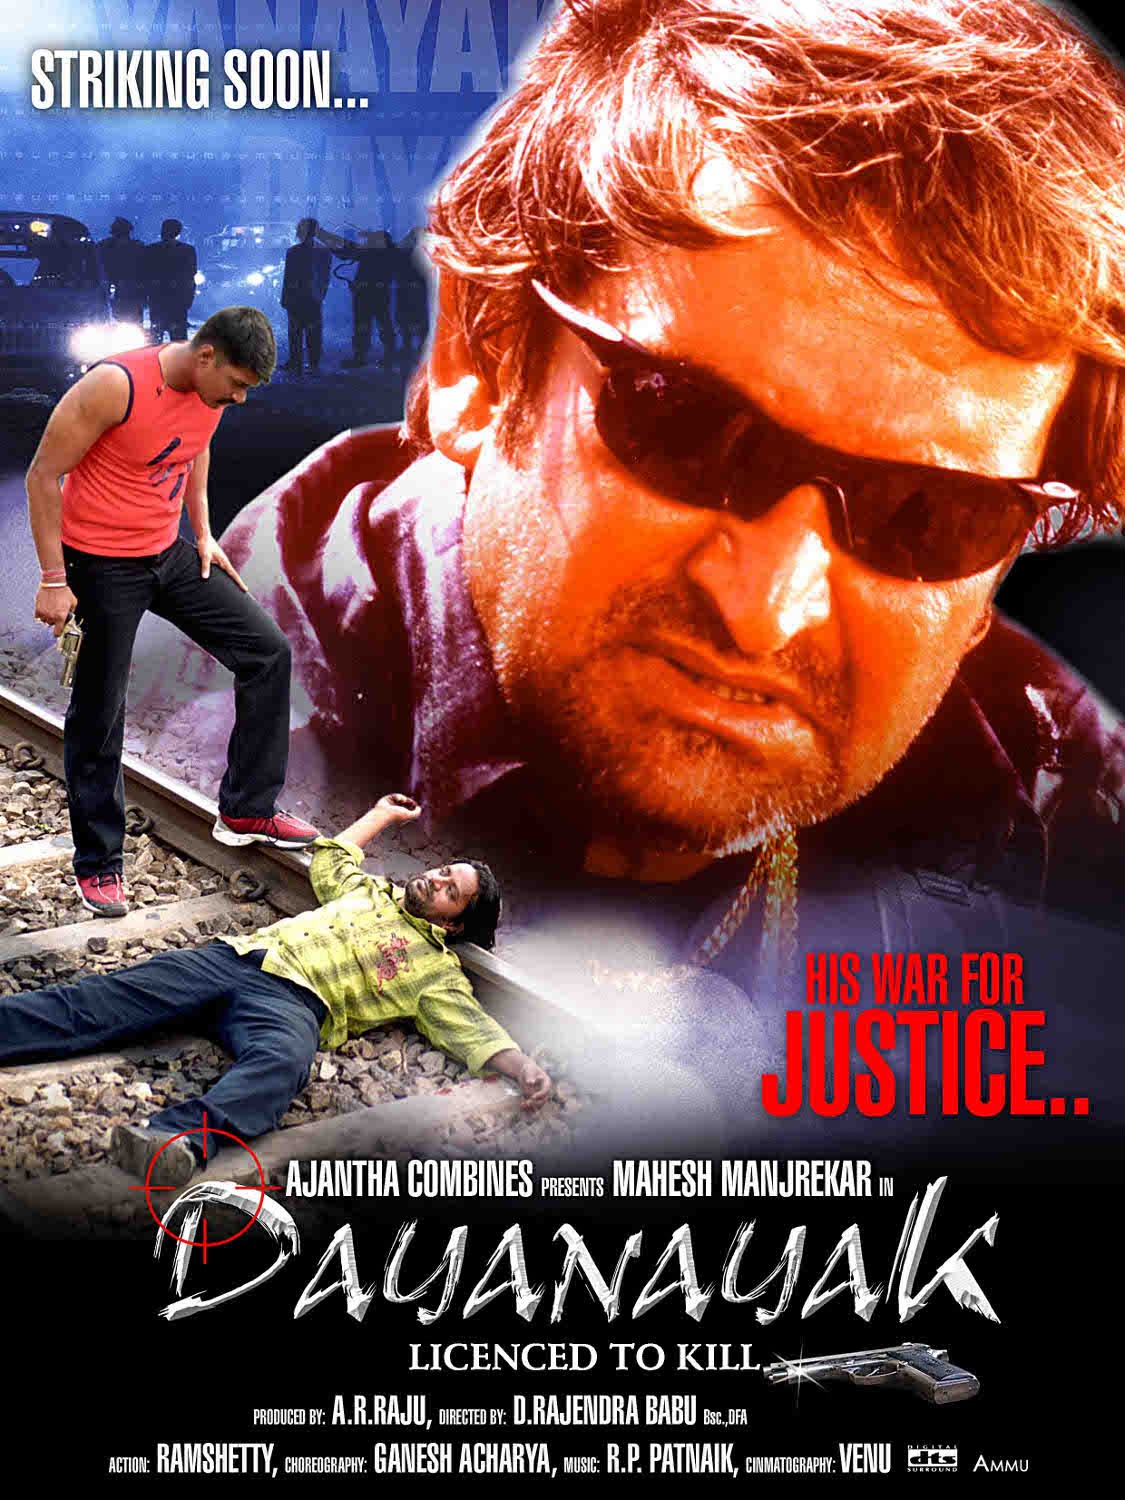 Extra Large Movie Poster Image for Encounter Dayanayak (#7 of 18)